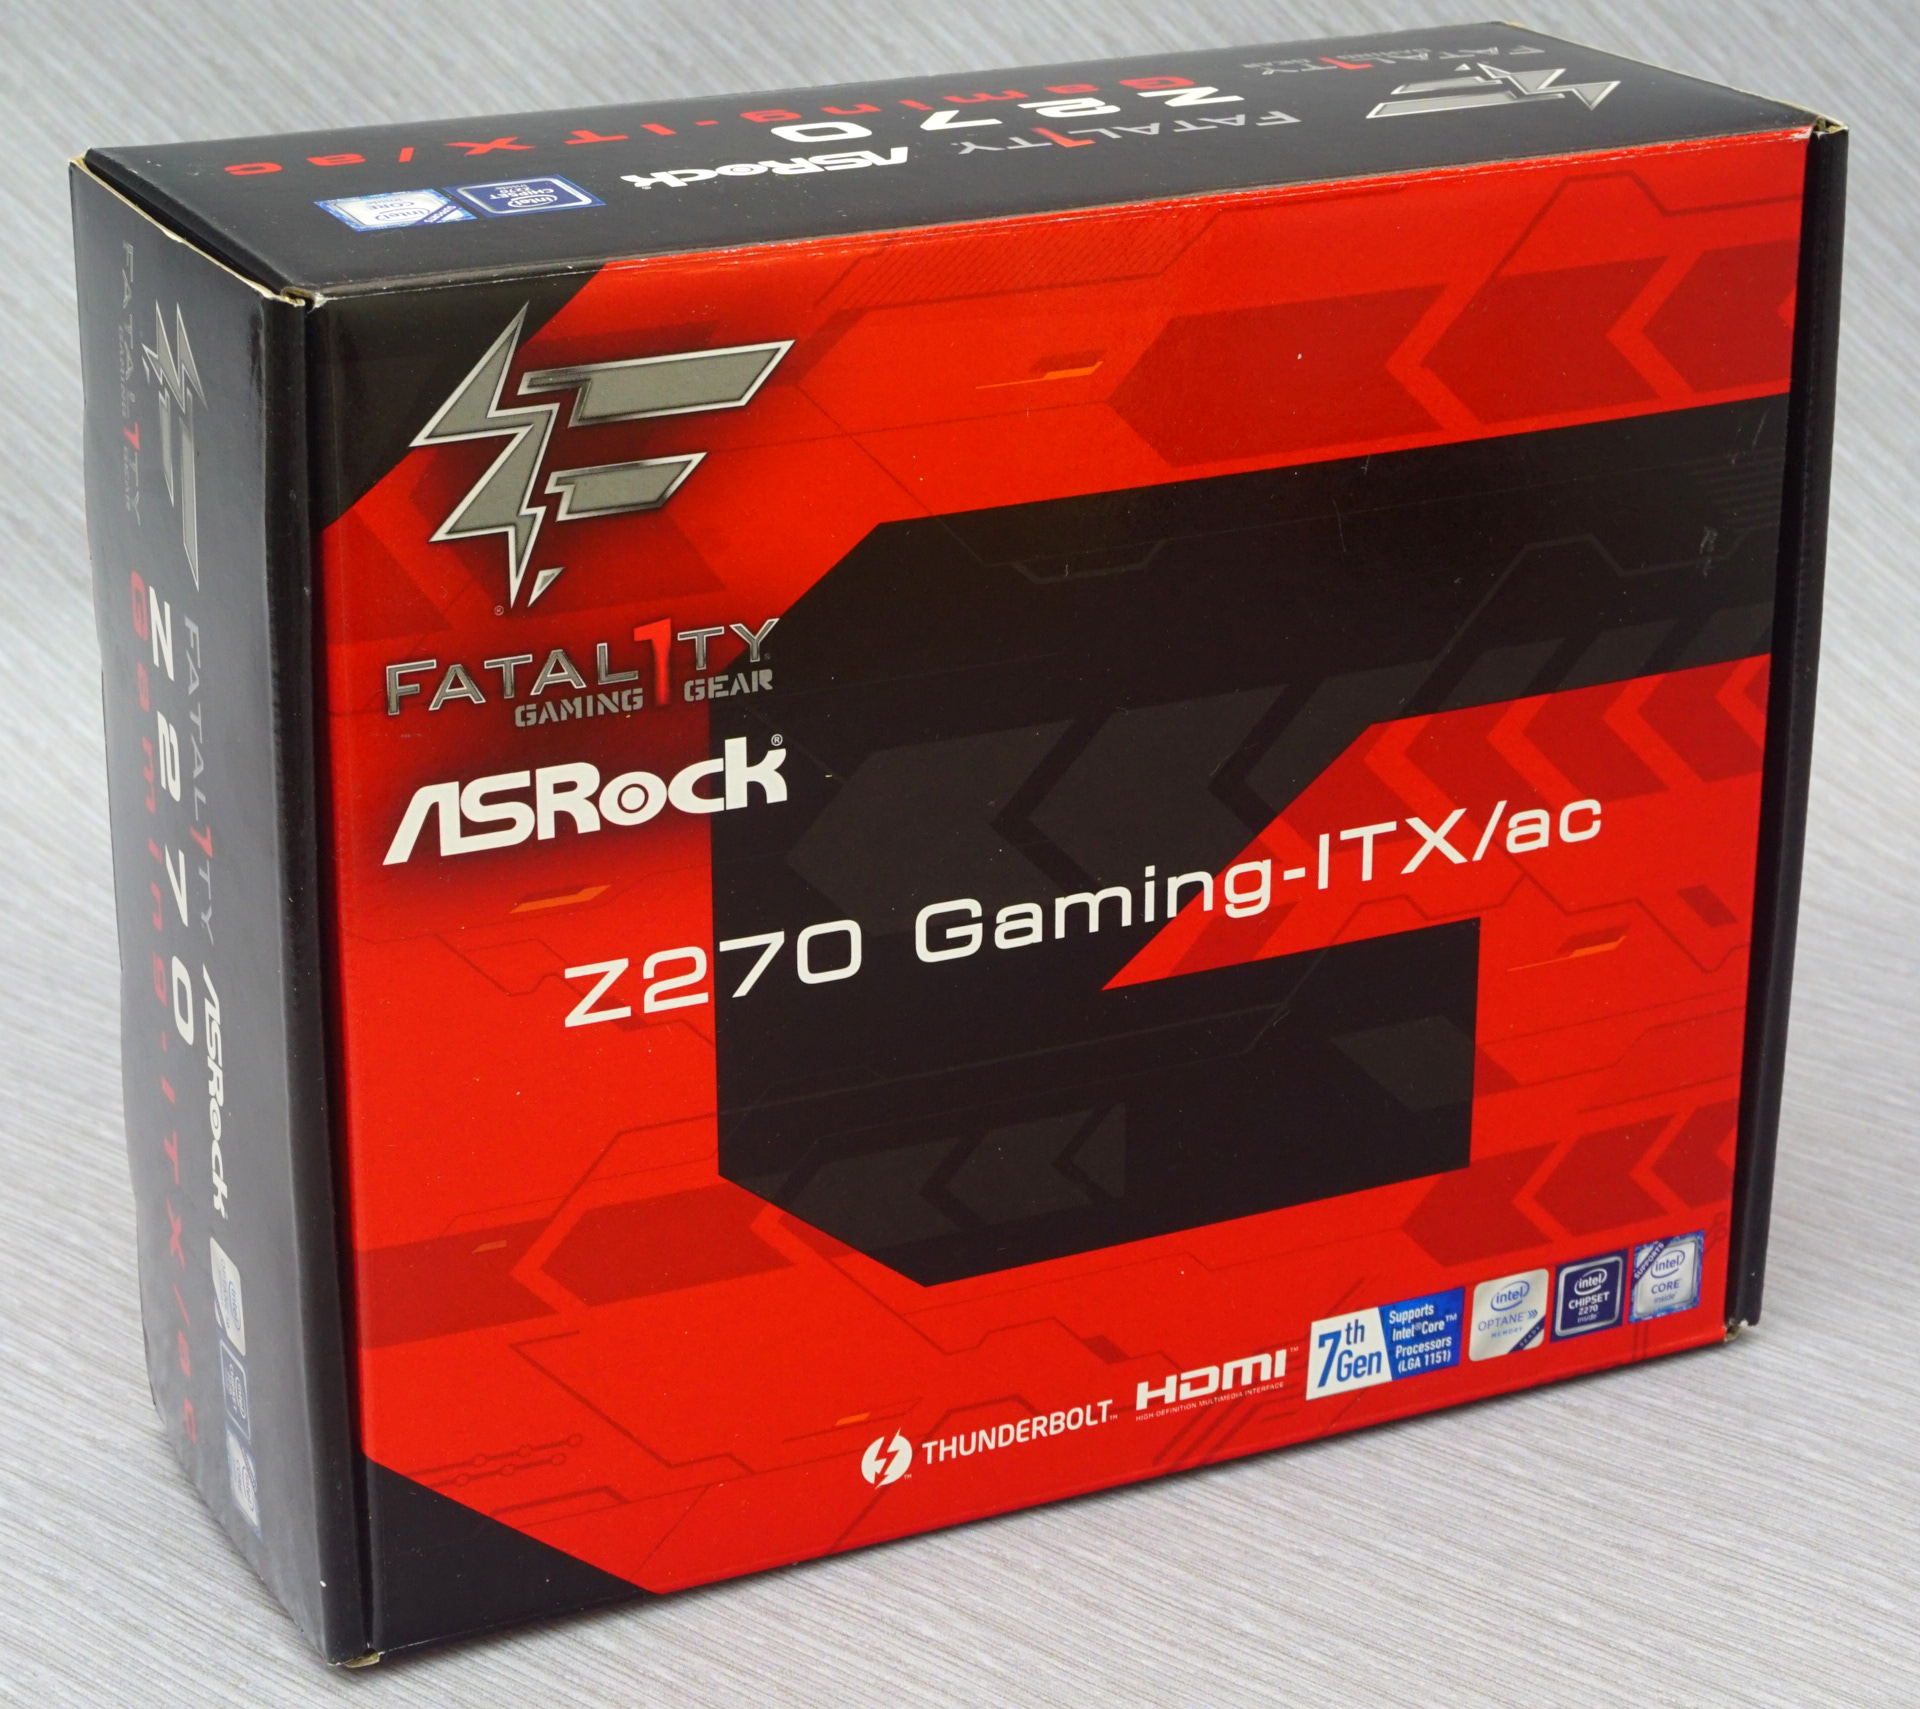 The ASRock Fatal1ty Z270 Gaming-ITX/ac Motherboard Review